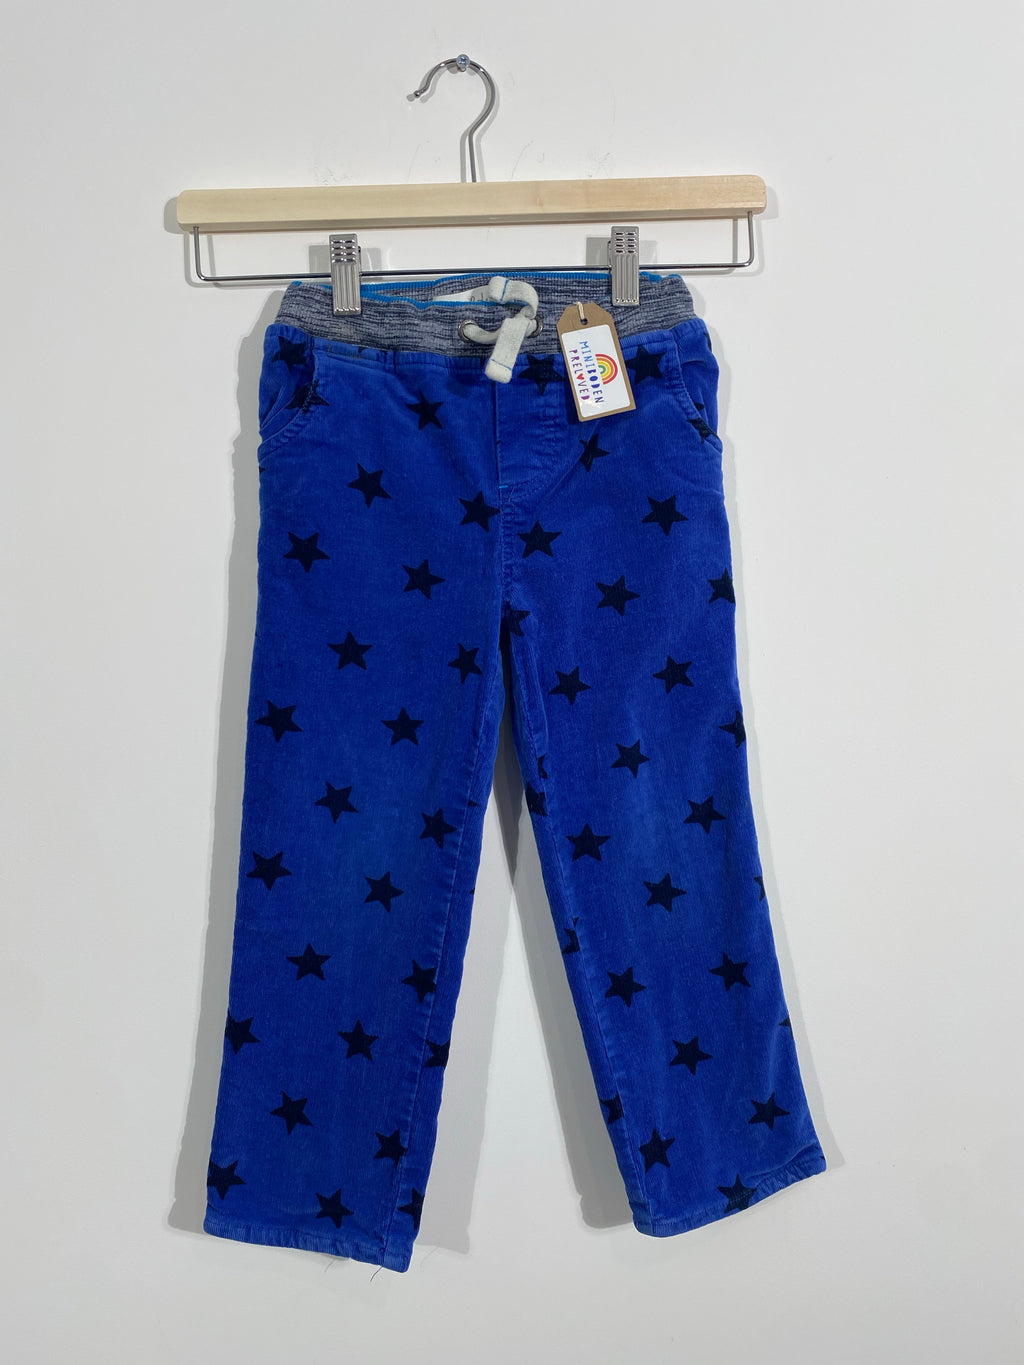 Vibrant Star Print Cord Trousers (3-4 Years)